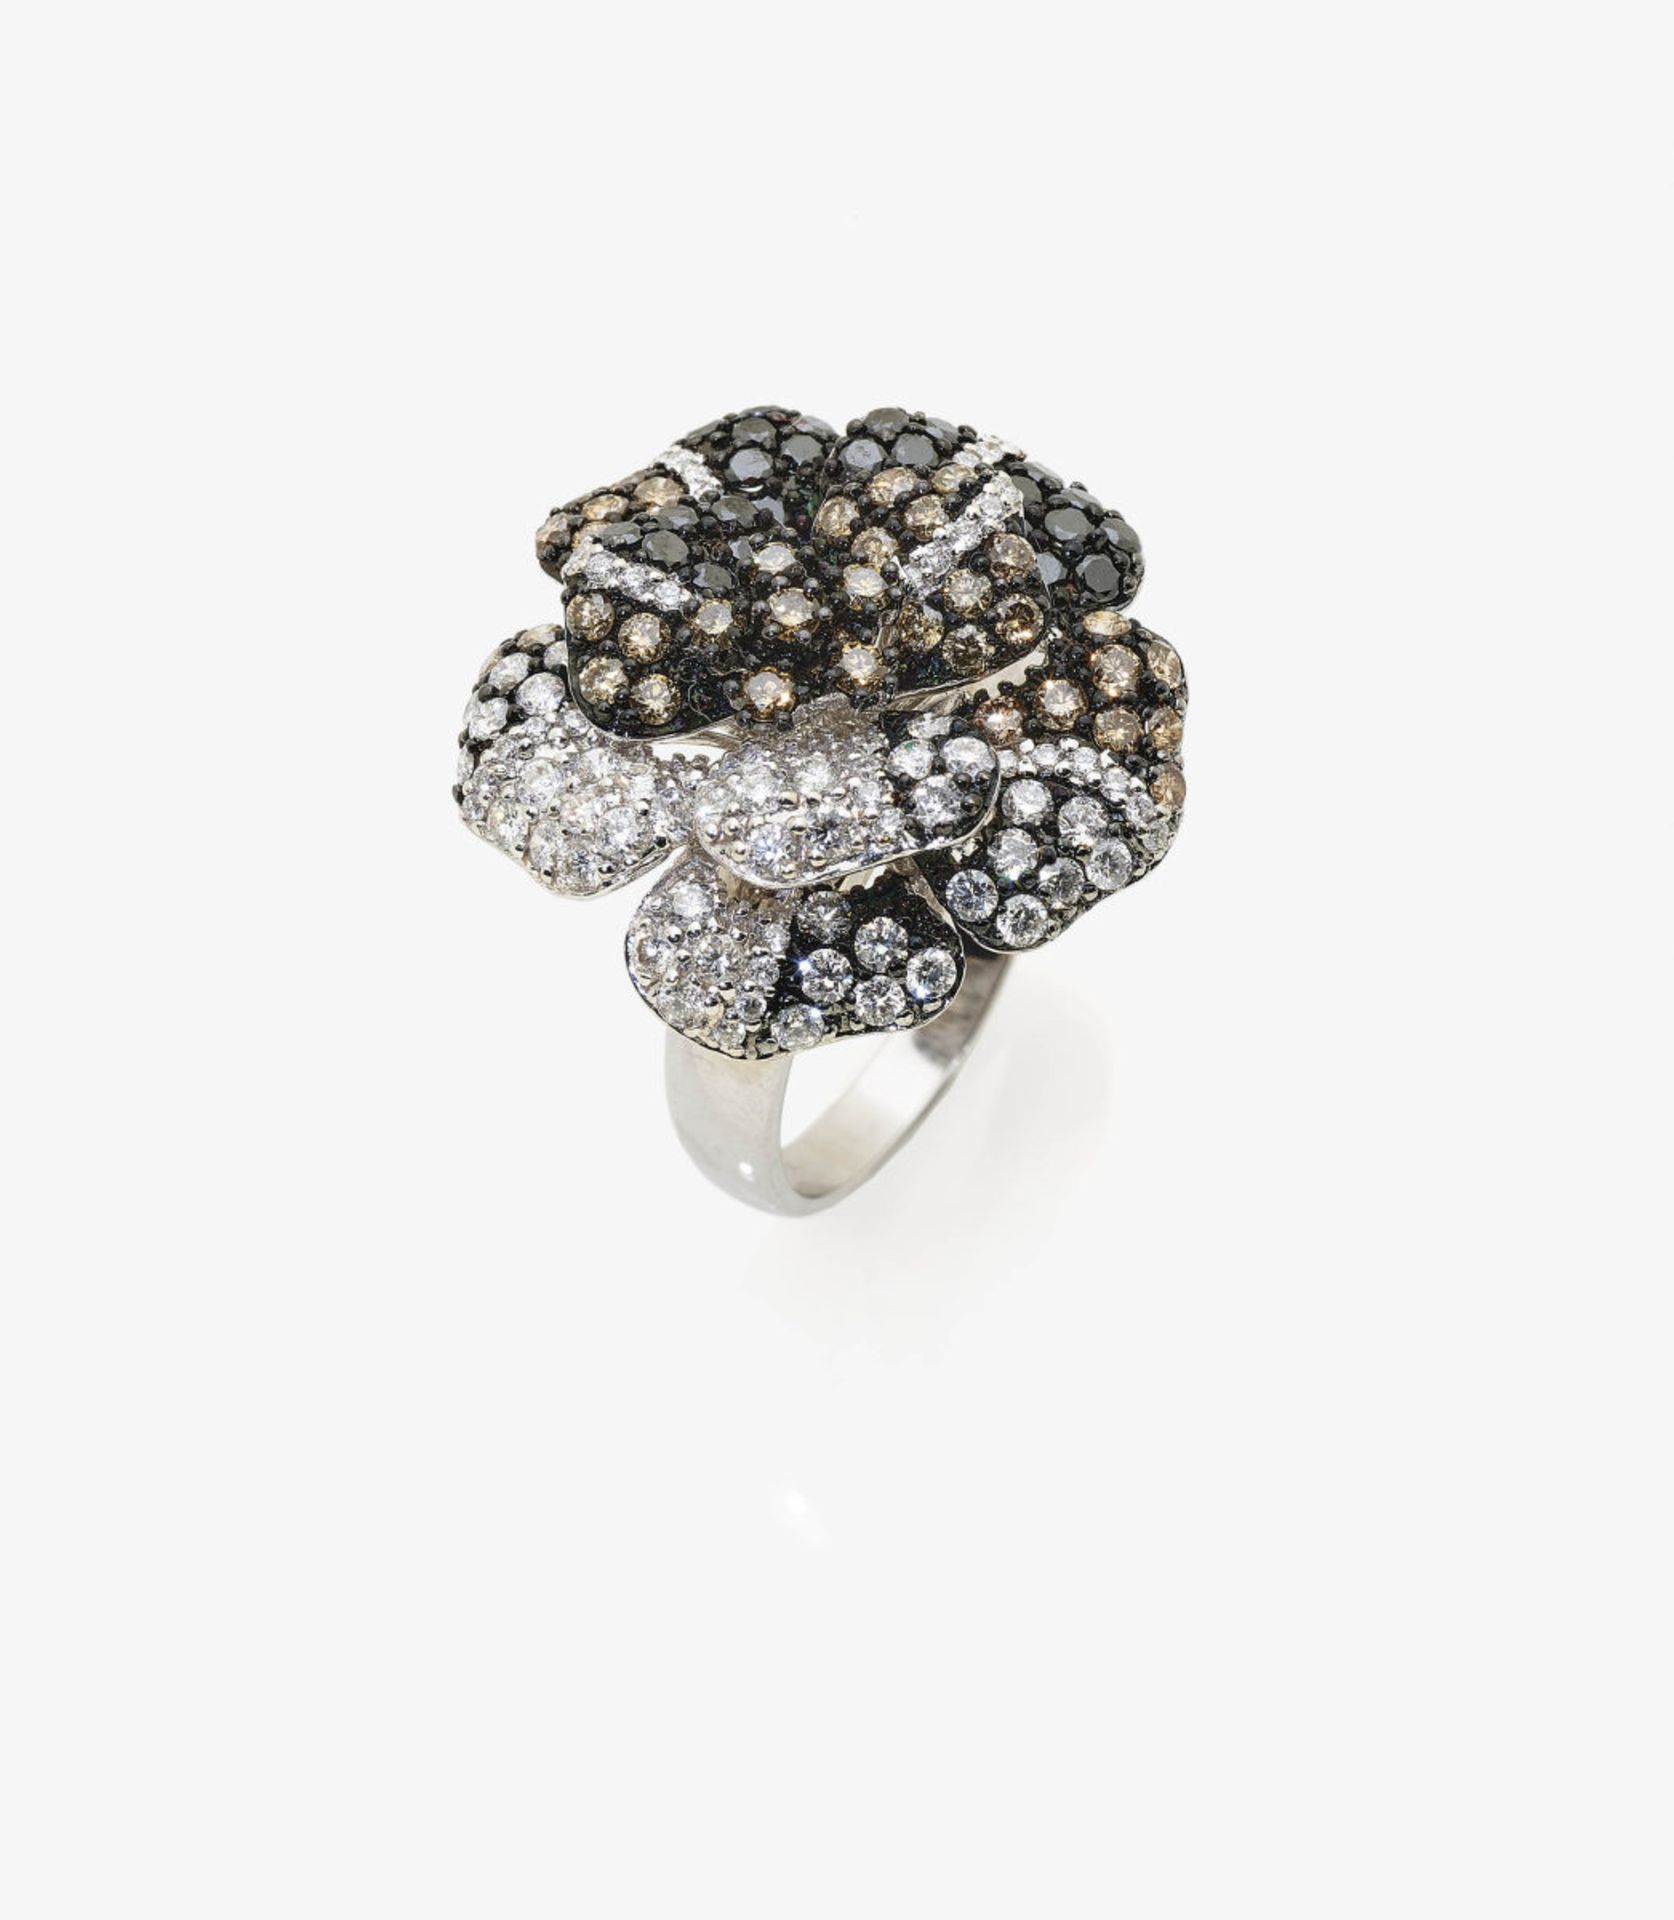 A Floral Ring